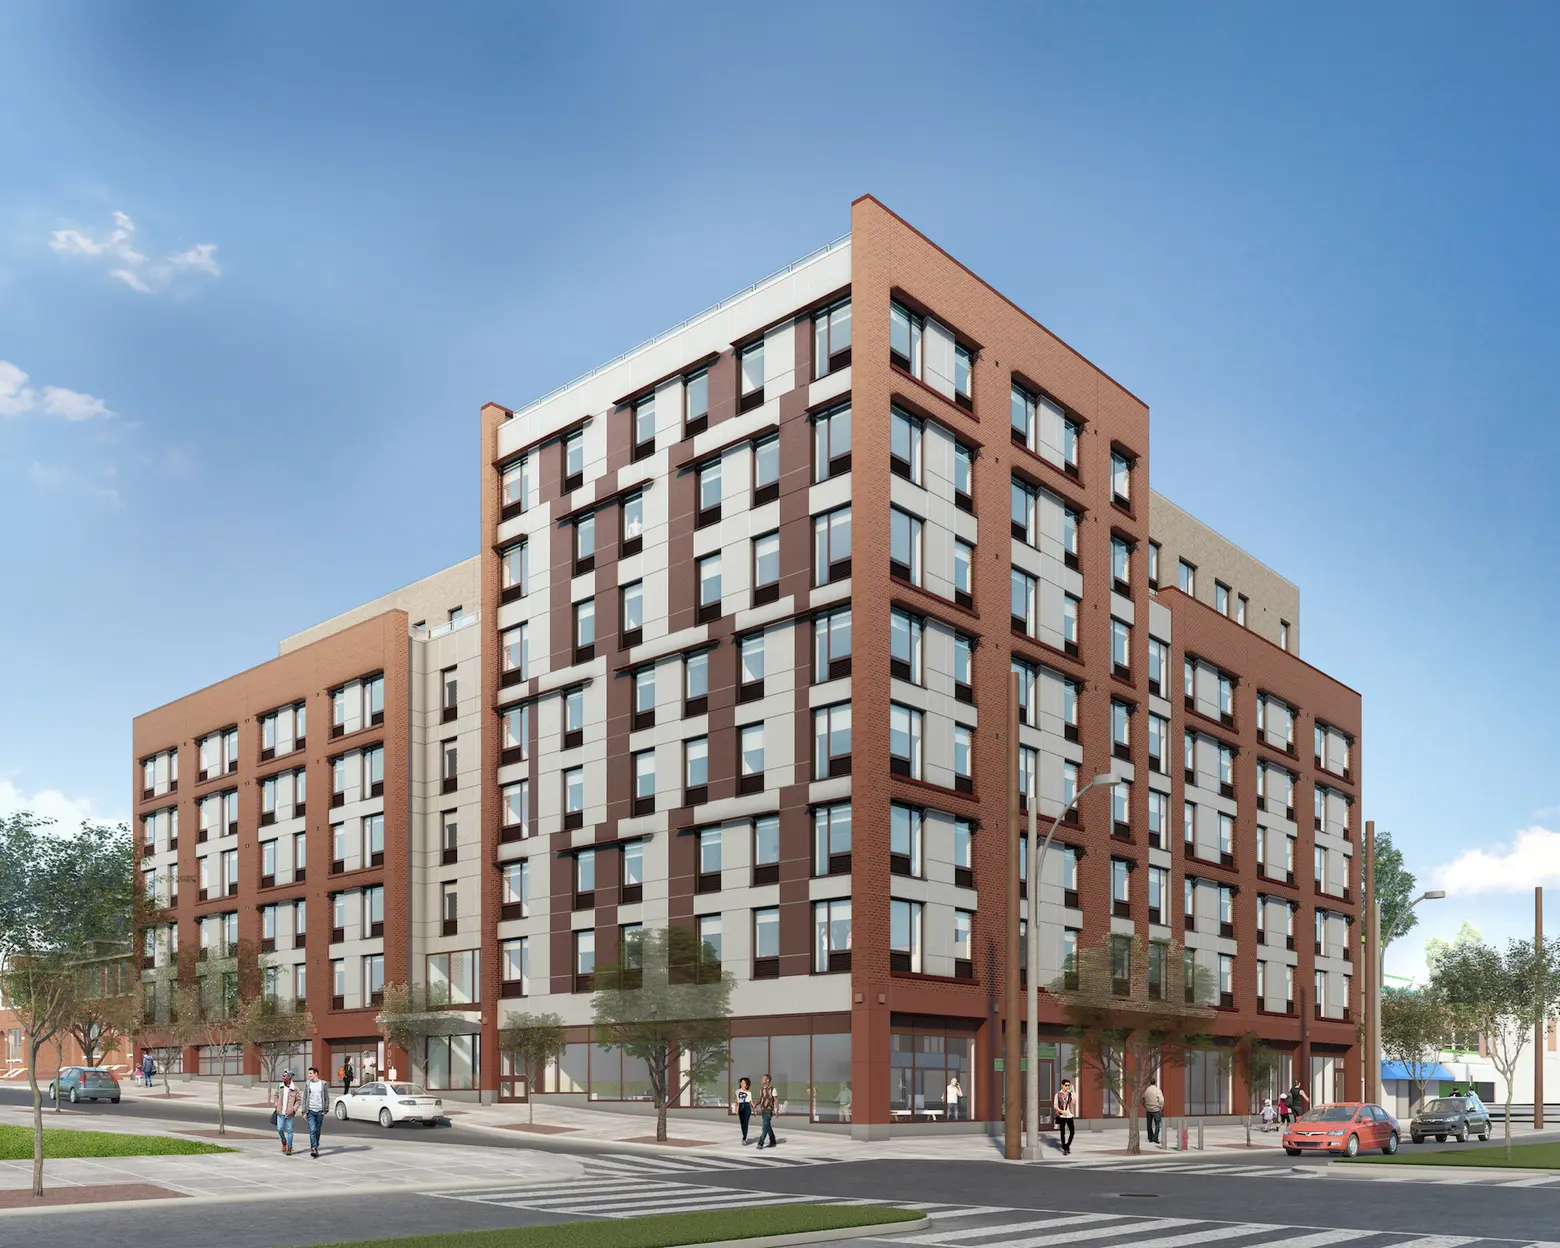 Apply for 96 mixed-income apartments, half set aside for seniors, in Hunts Point, from $211/month